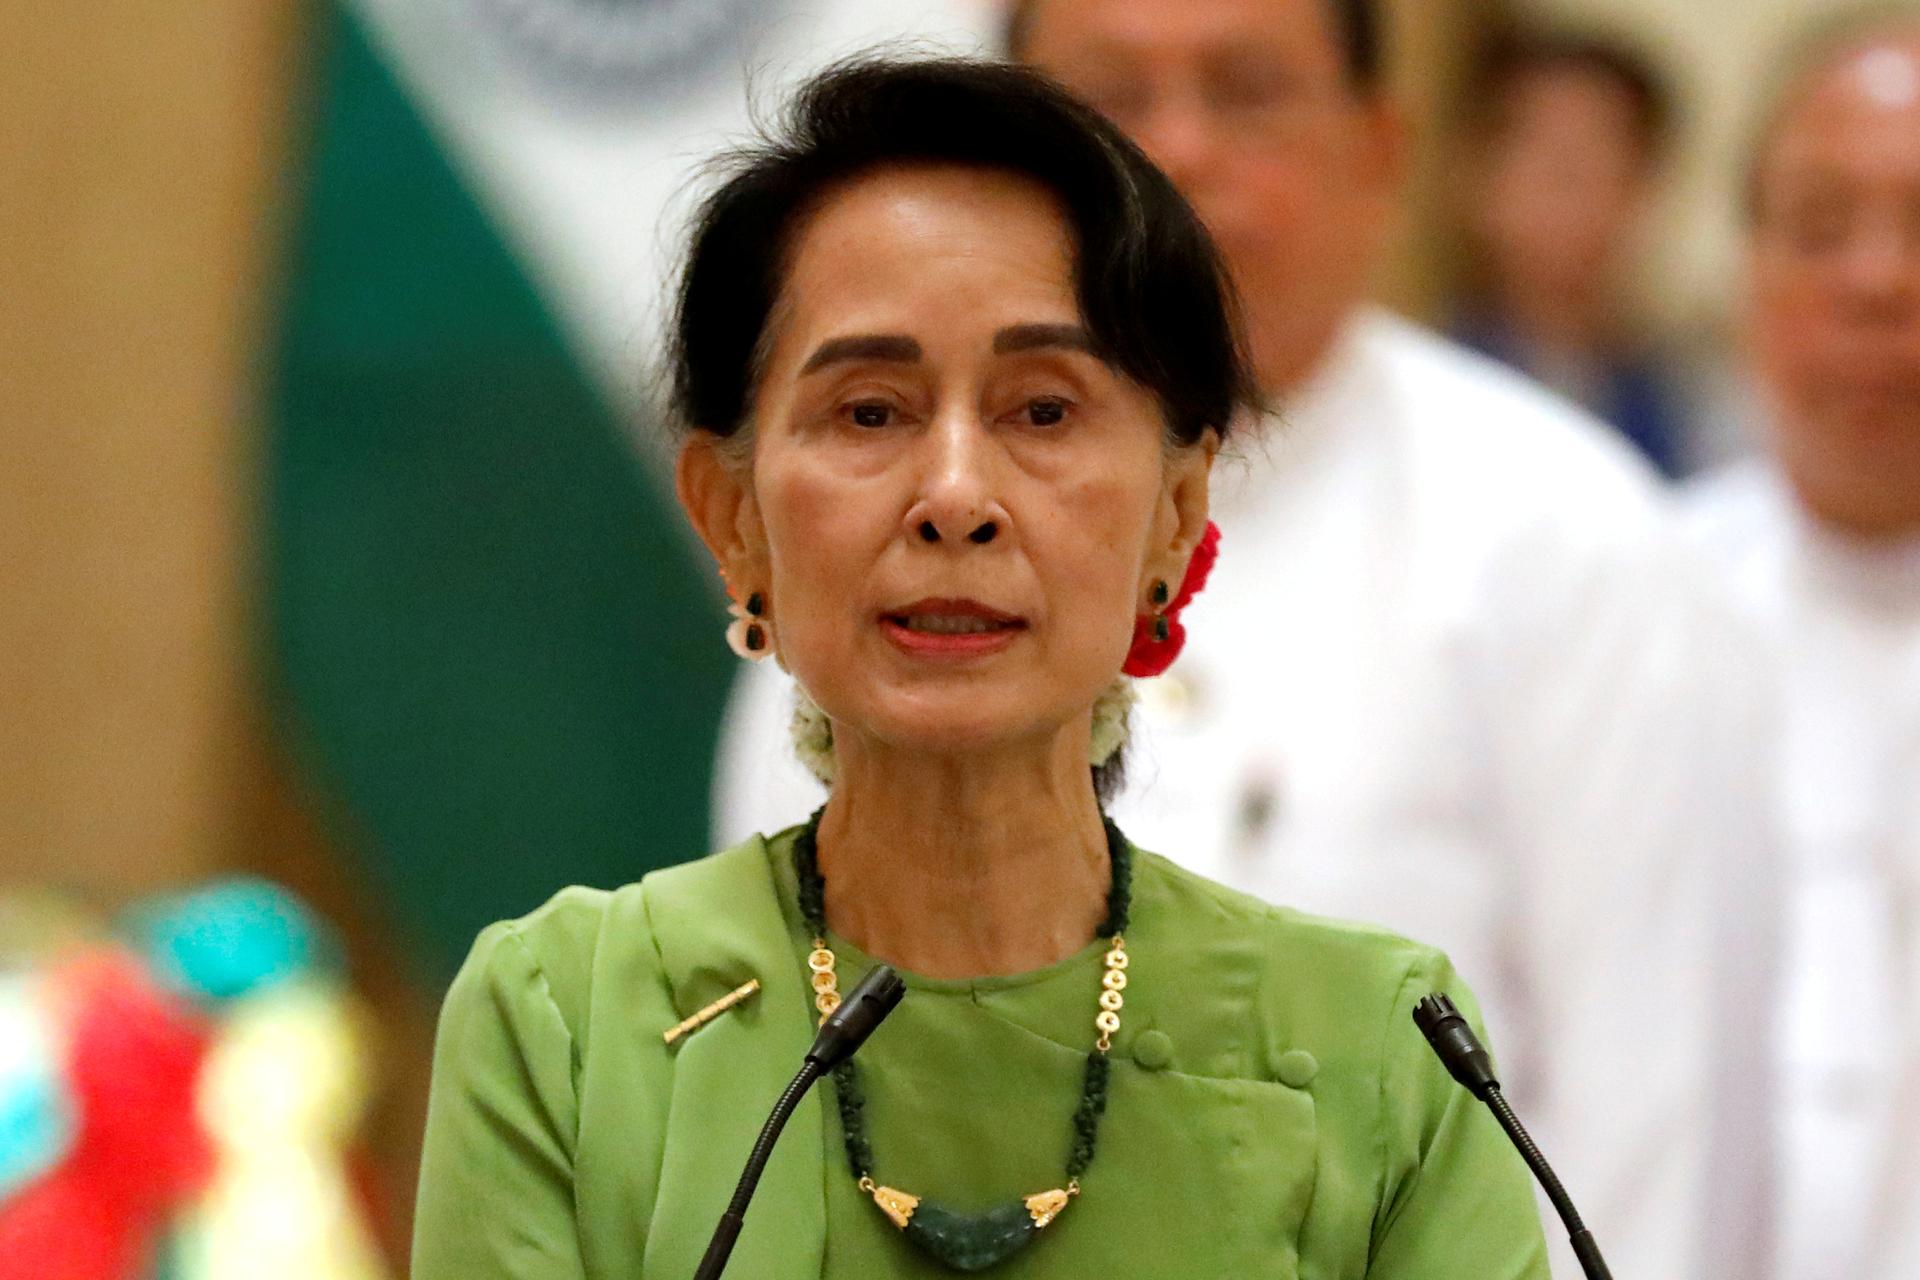 Aung San Suu Kyi speaking at a news conference in Myanmar.